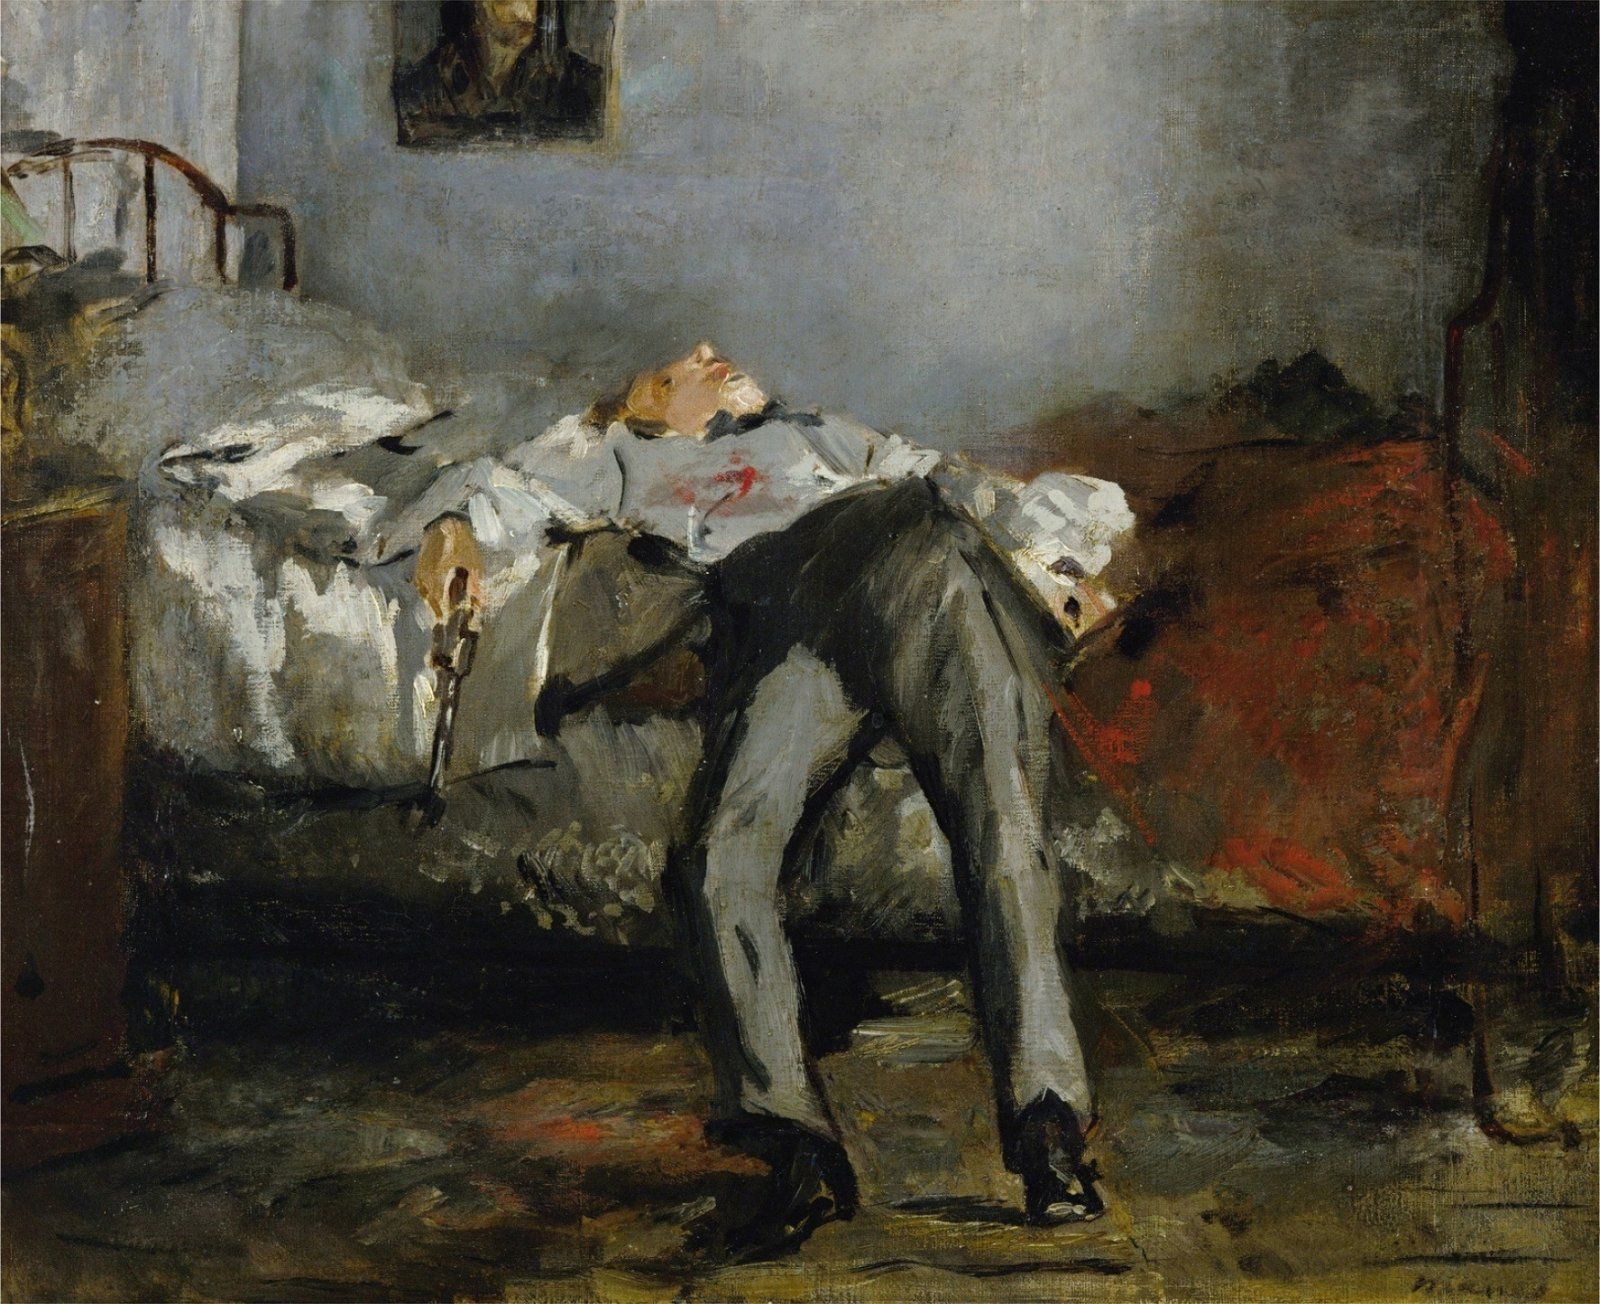 Le Suicide, 1877 by Edouard Manet.jpg